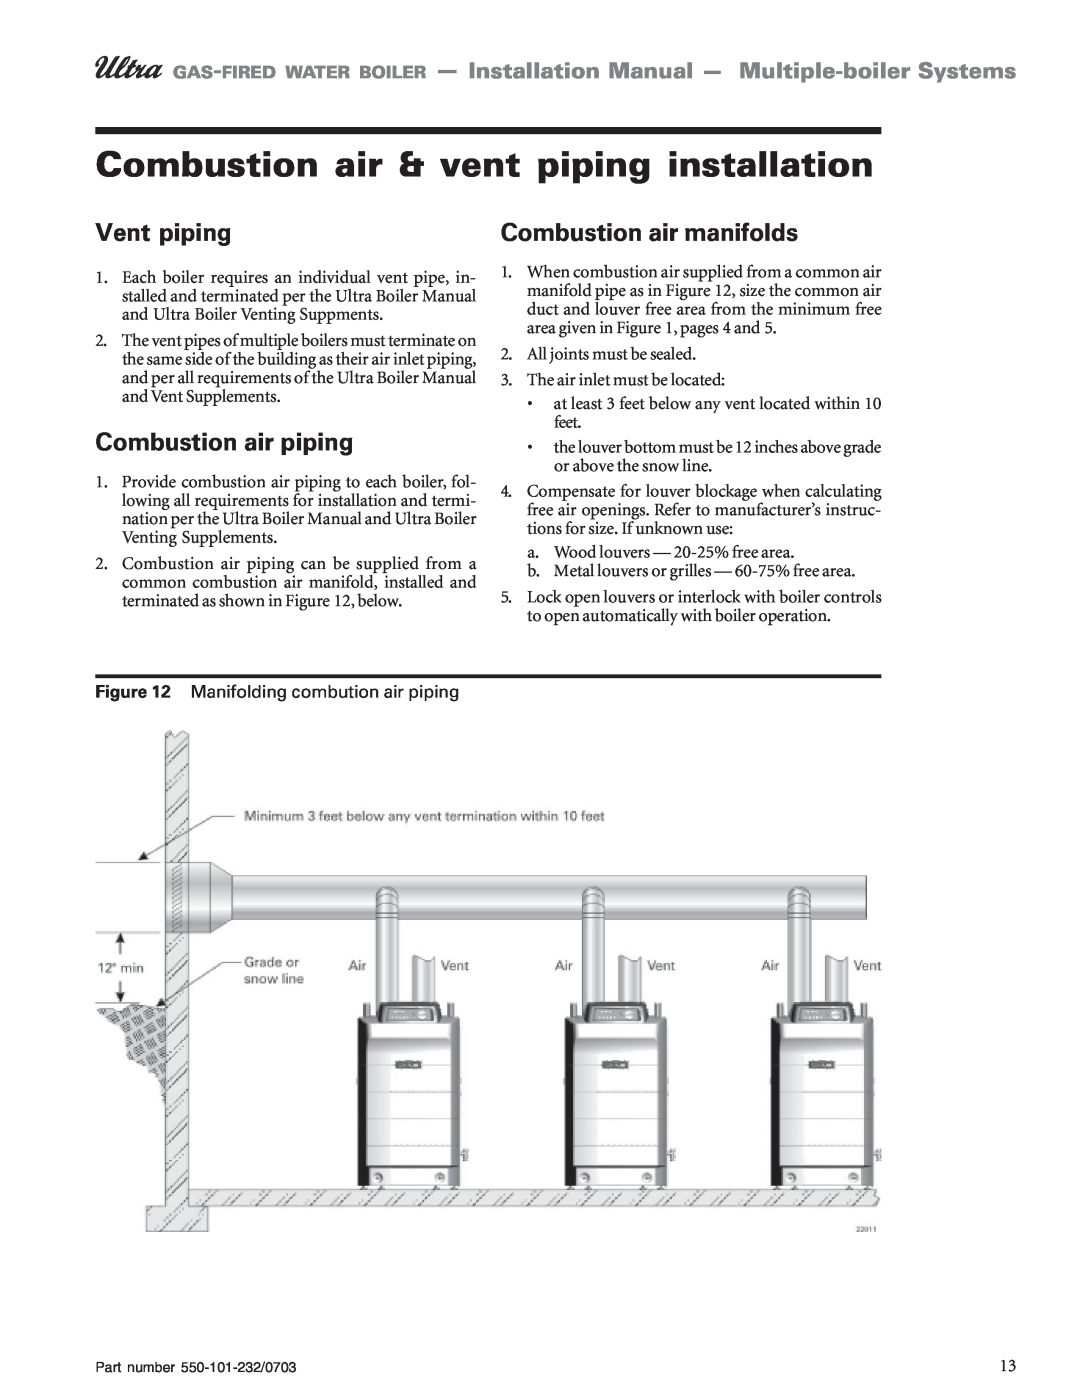 Weil-McLain Boiler Combustion air & vent piping installation, Vent piping, Combustion air manifolds, Combustion air piping 